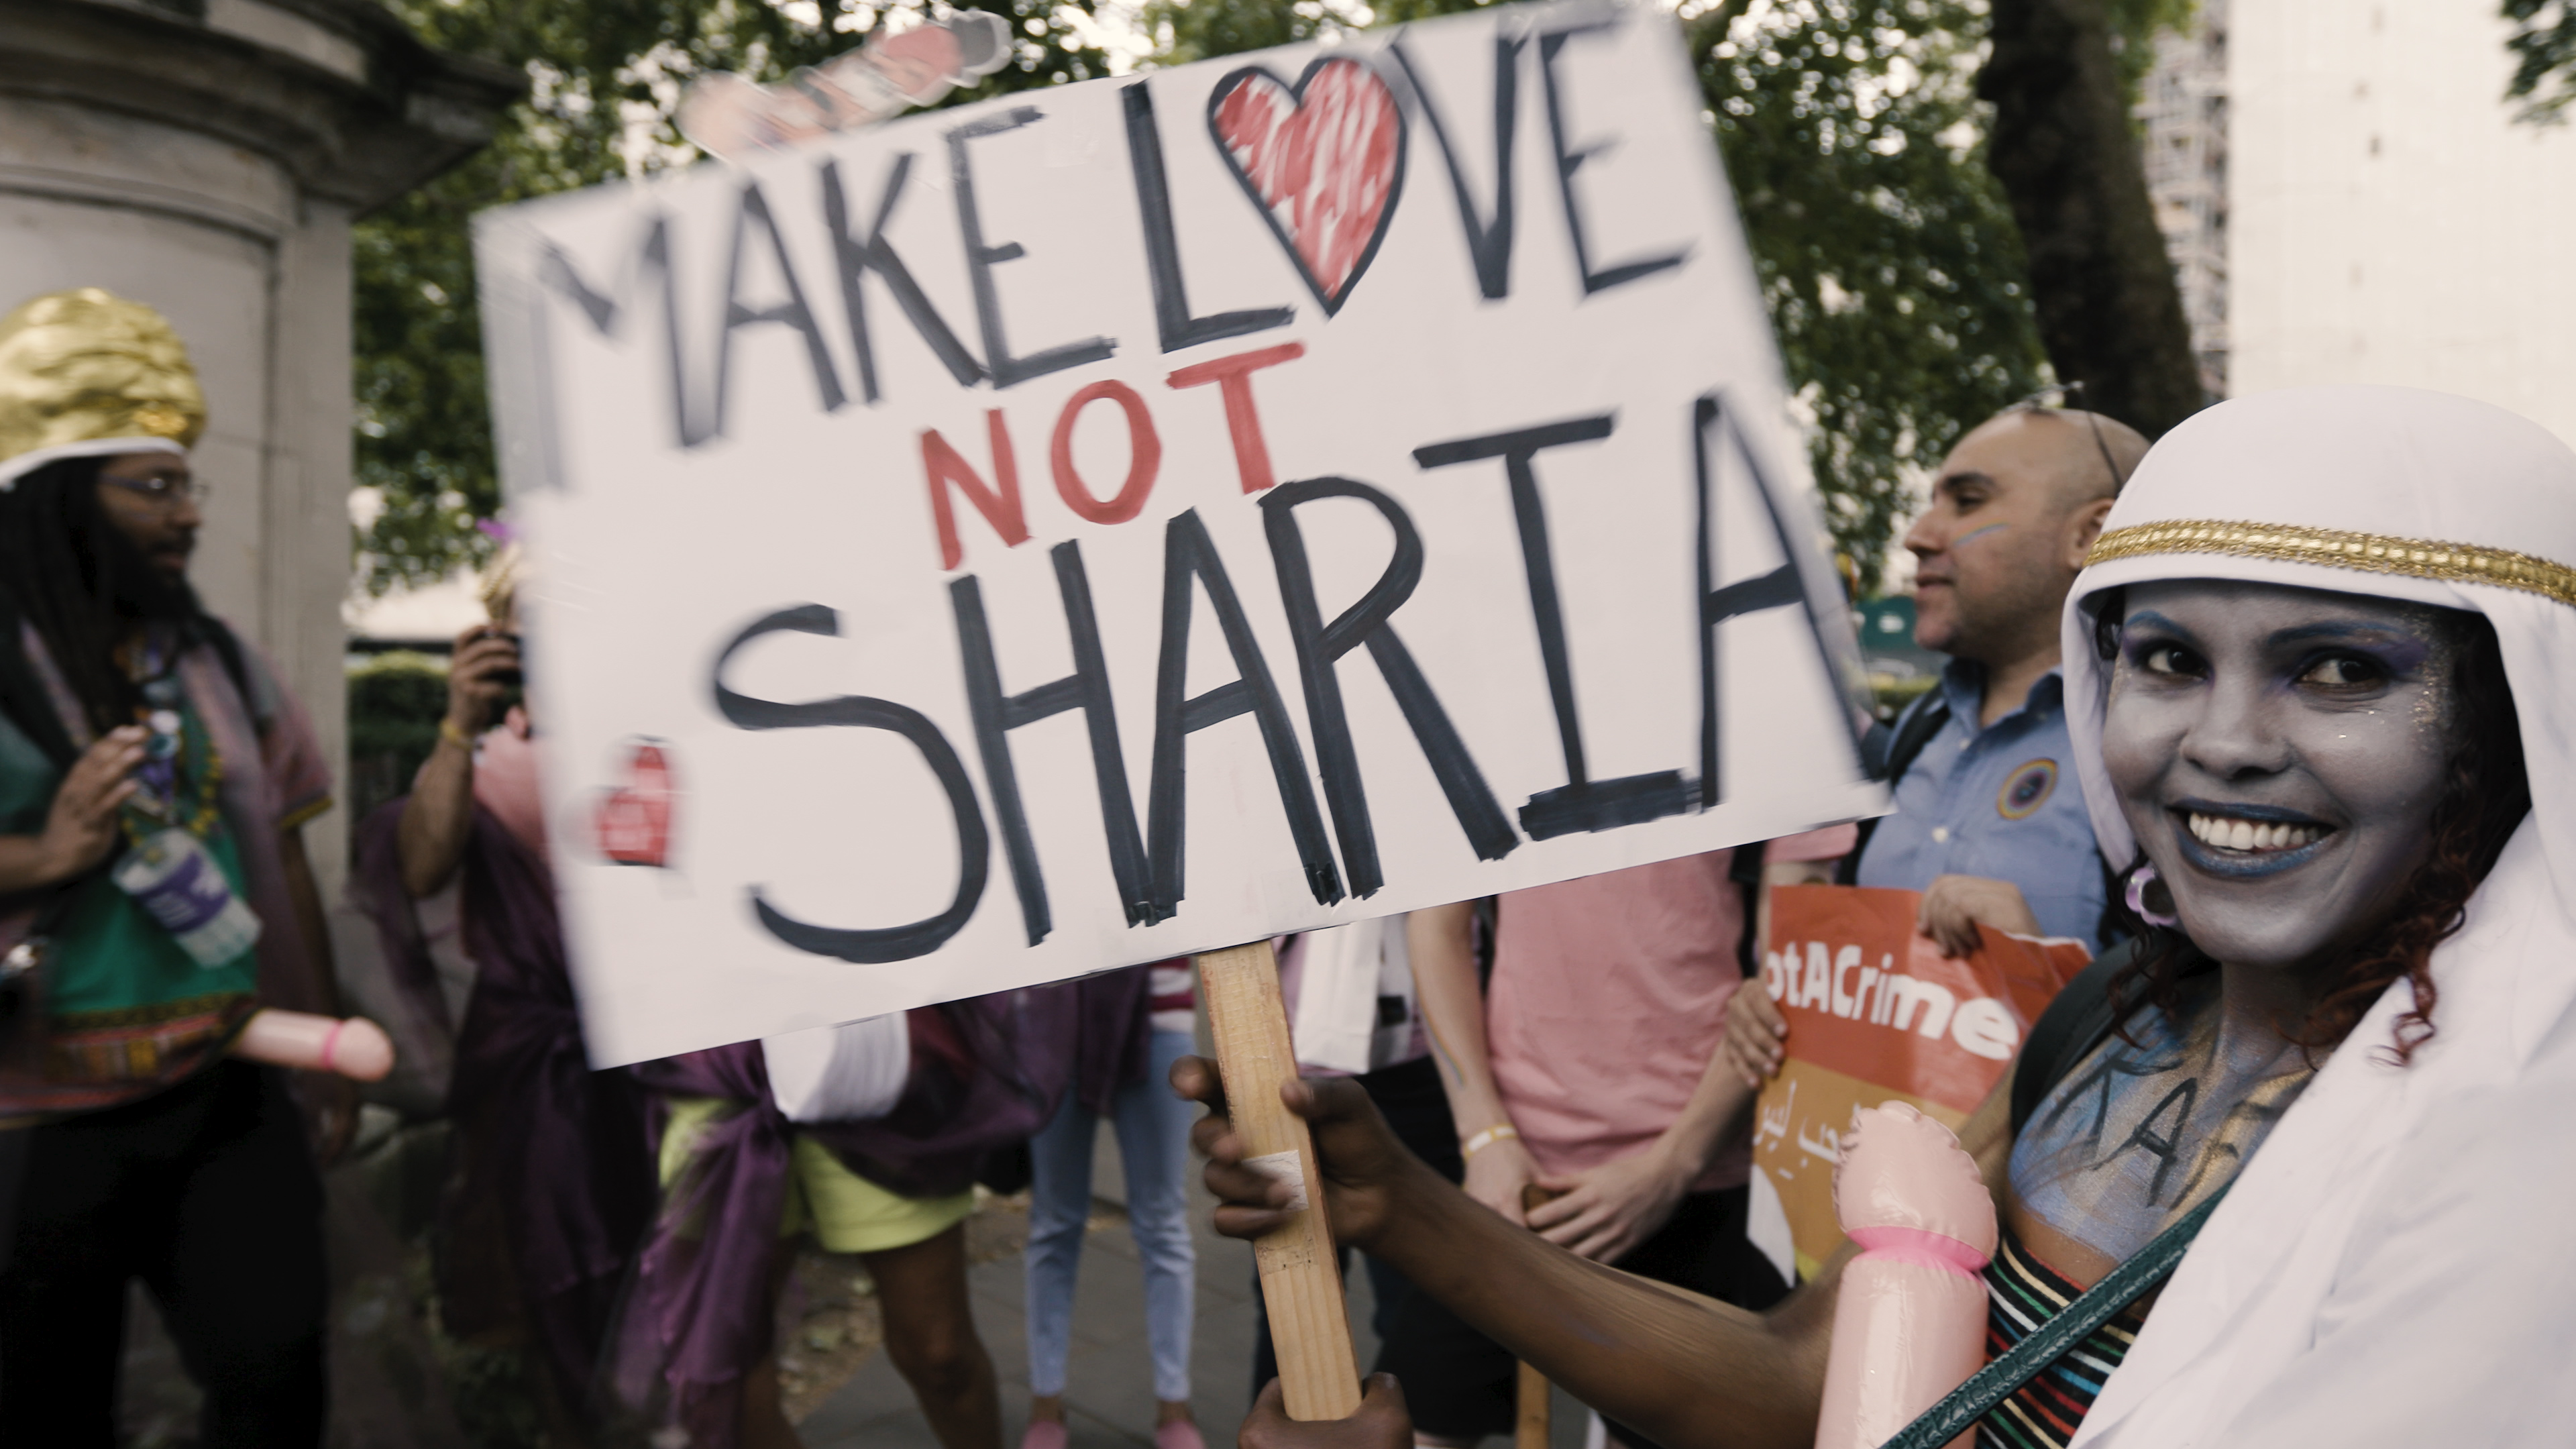 London Pride photo with banner make love not sharia